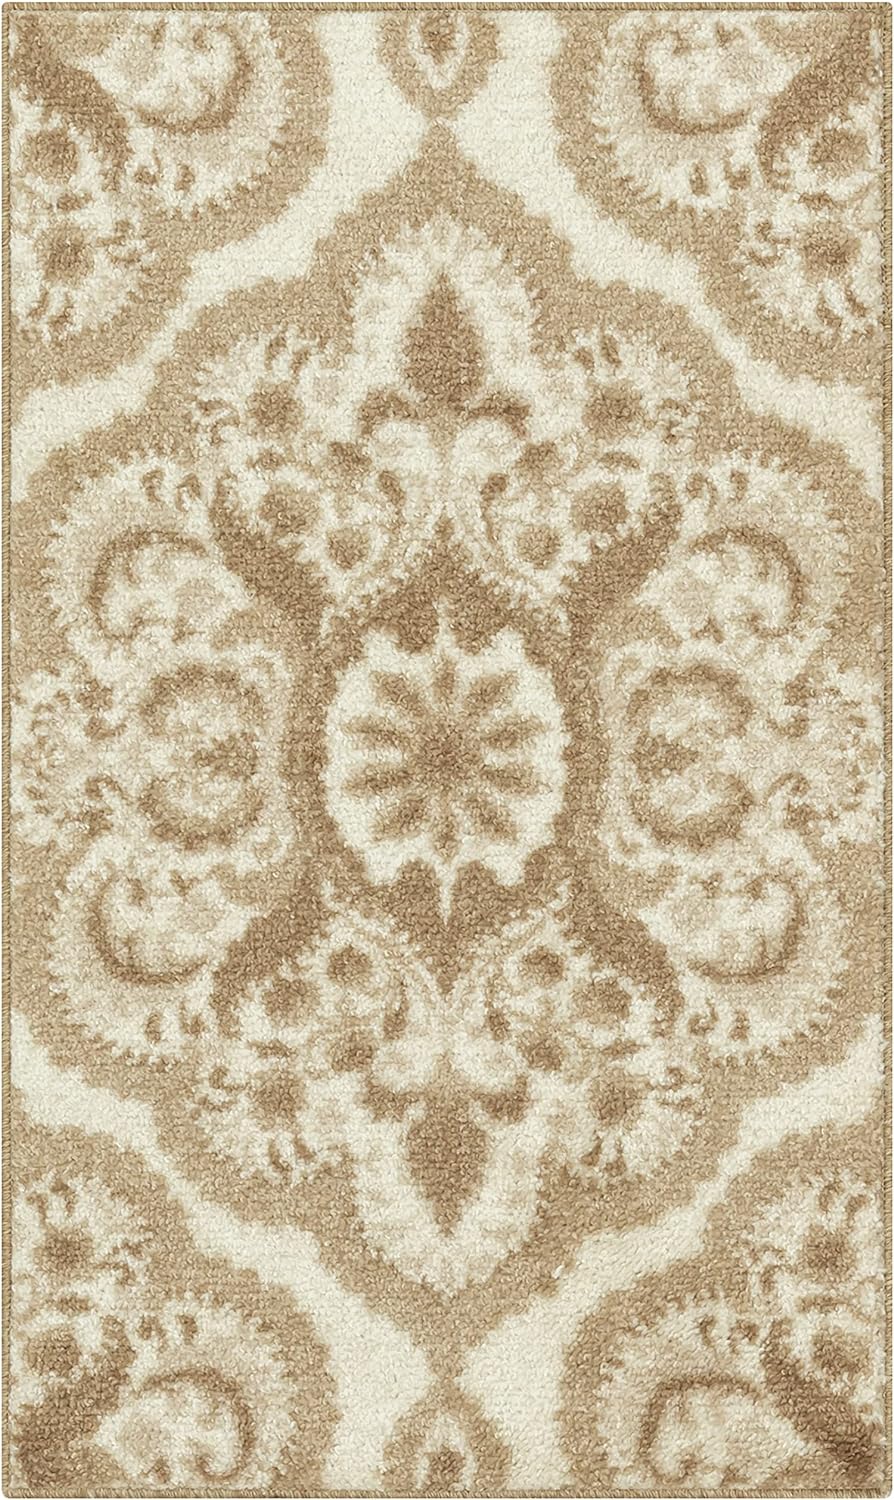 I bought many of the Maples Vivian Medallion pattern in grey. I have special needs pets and a child so I needed a rug that was practical, affordable, soft for people, but also super easy to clean. I detest carpet cleaning machines and really wanted something I could clean without that.I doubt the listing says to put them in the washing machine BUT I DO! They even lived through being put in the dryer on high, which I never do but my helpful other half did in an effort to help with laundry. I wa